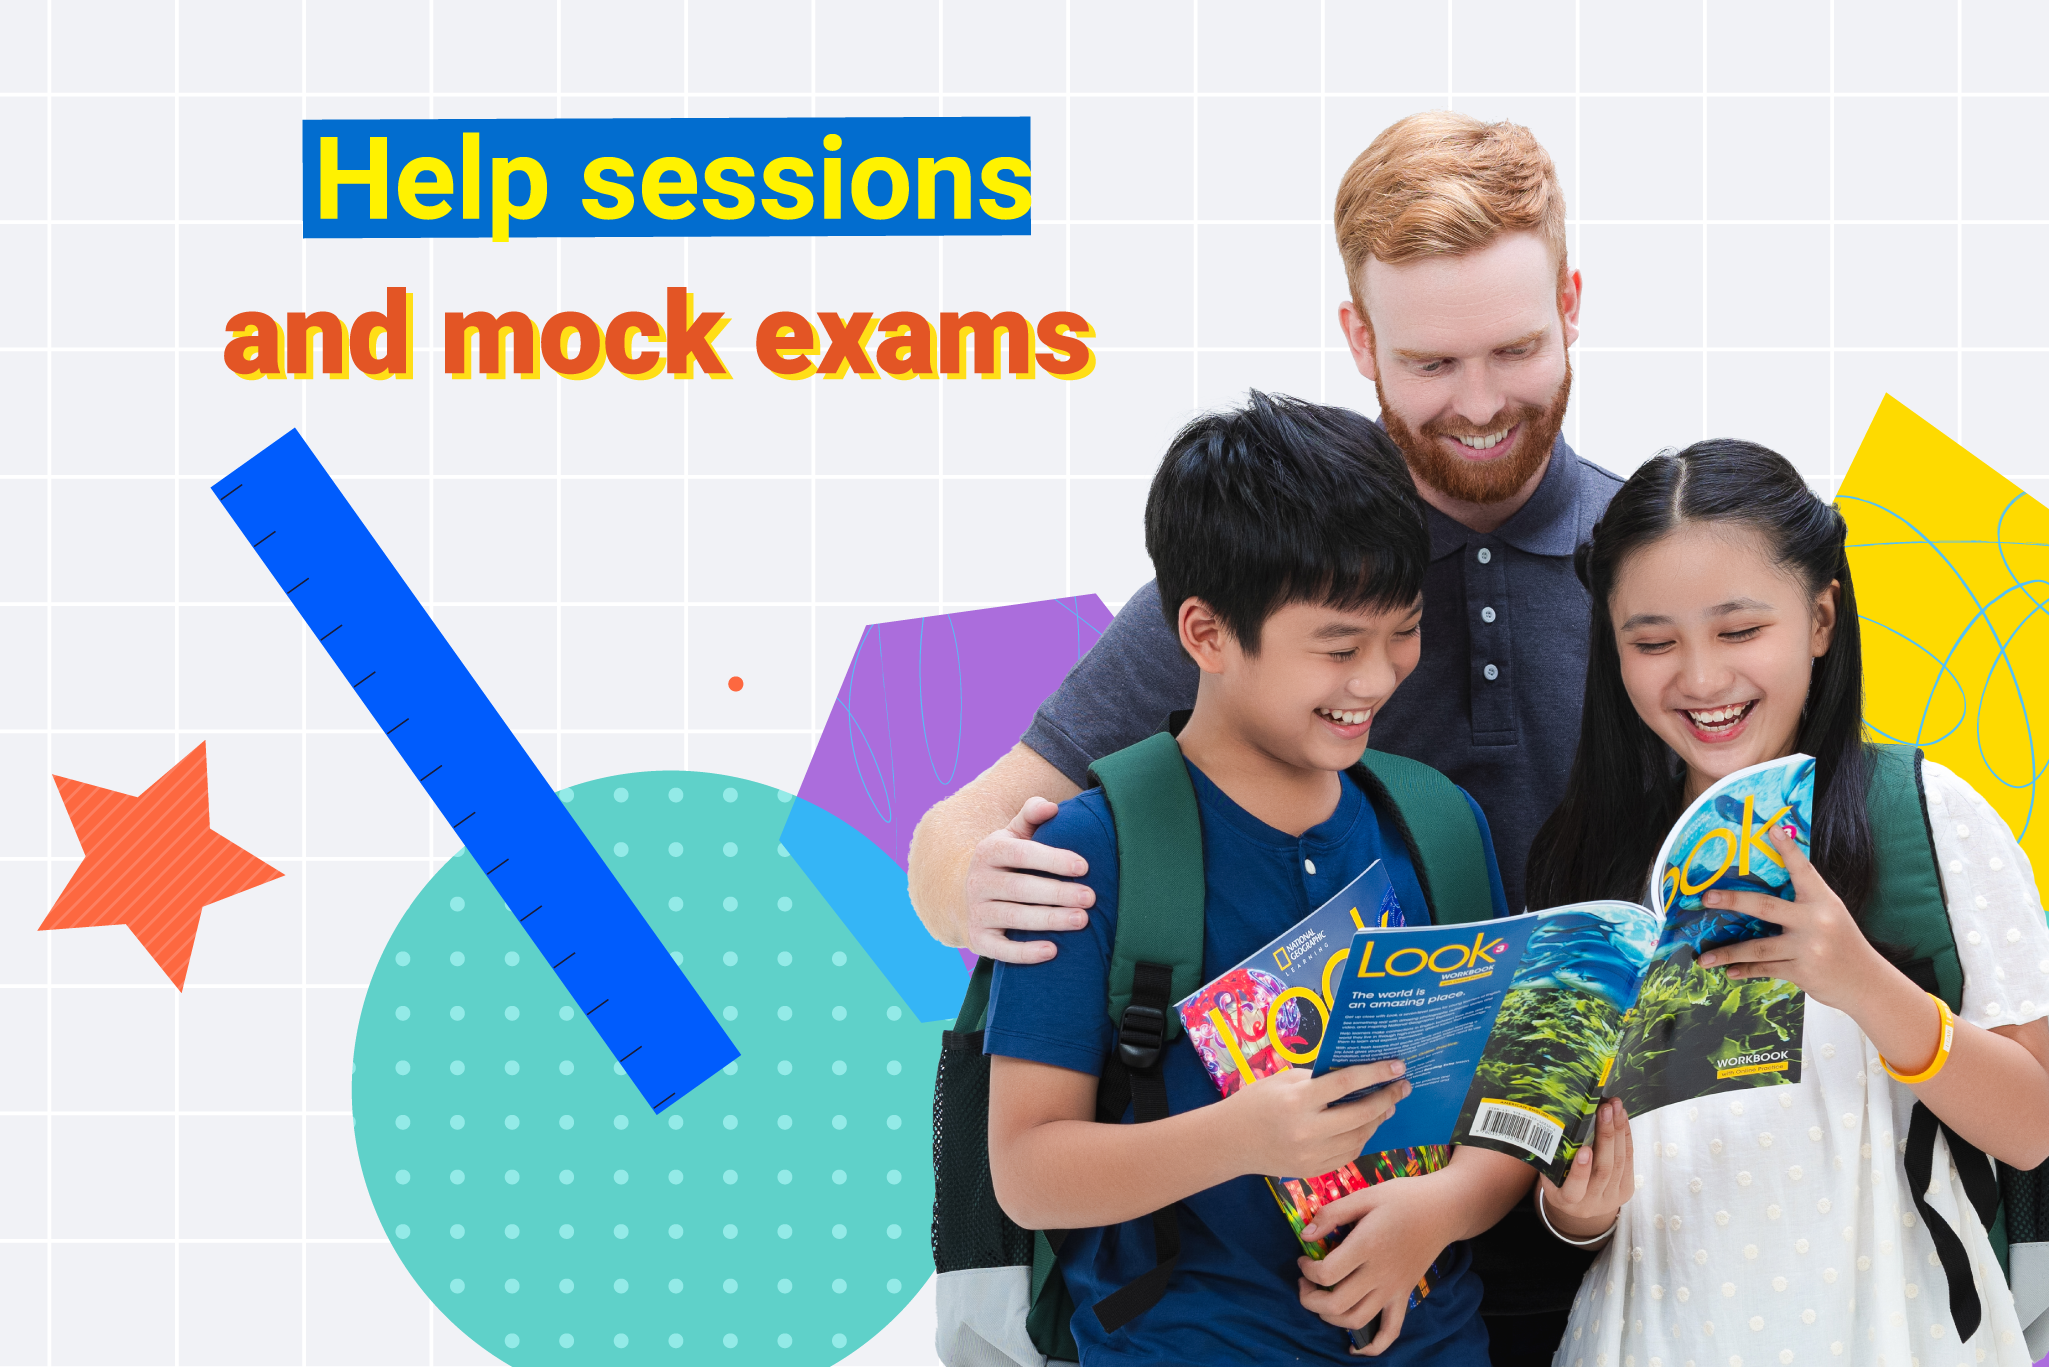 Help sessions and mock exams